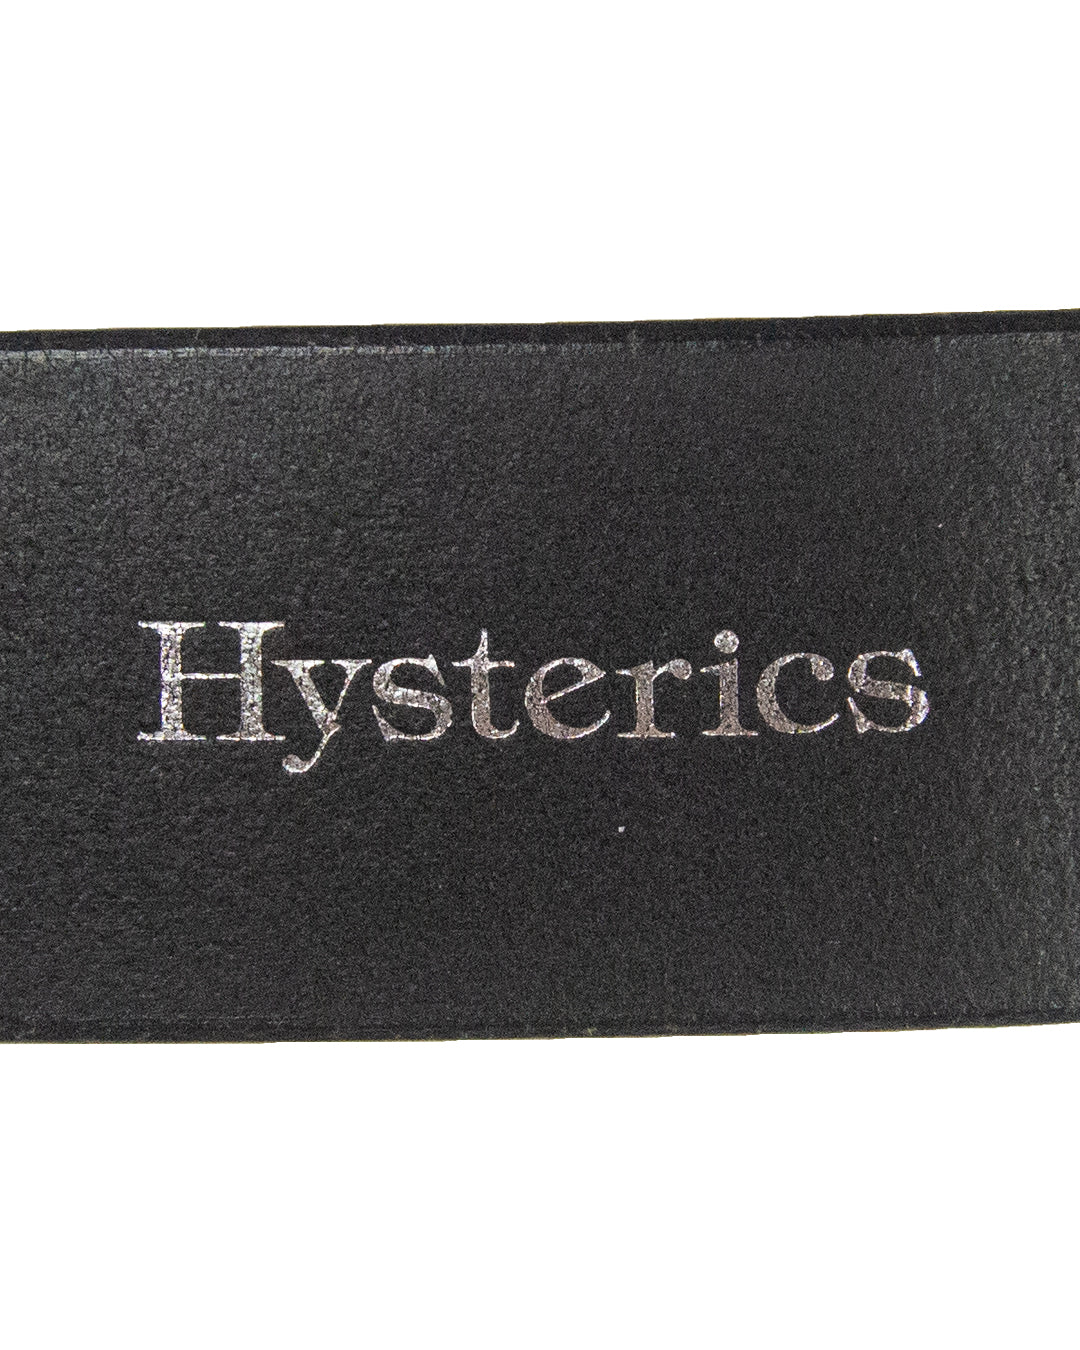 Hysteric Glamour Metal Buckle Leather Belt